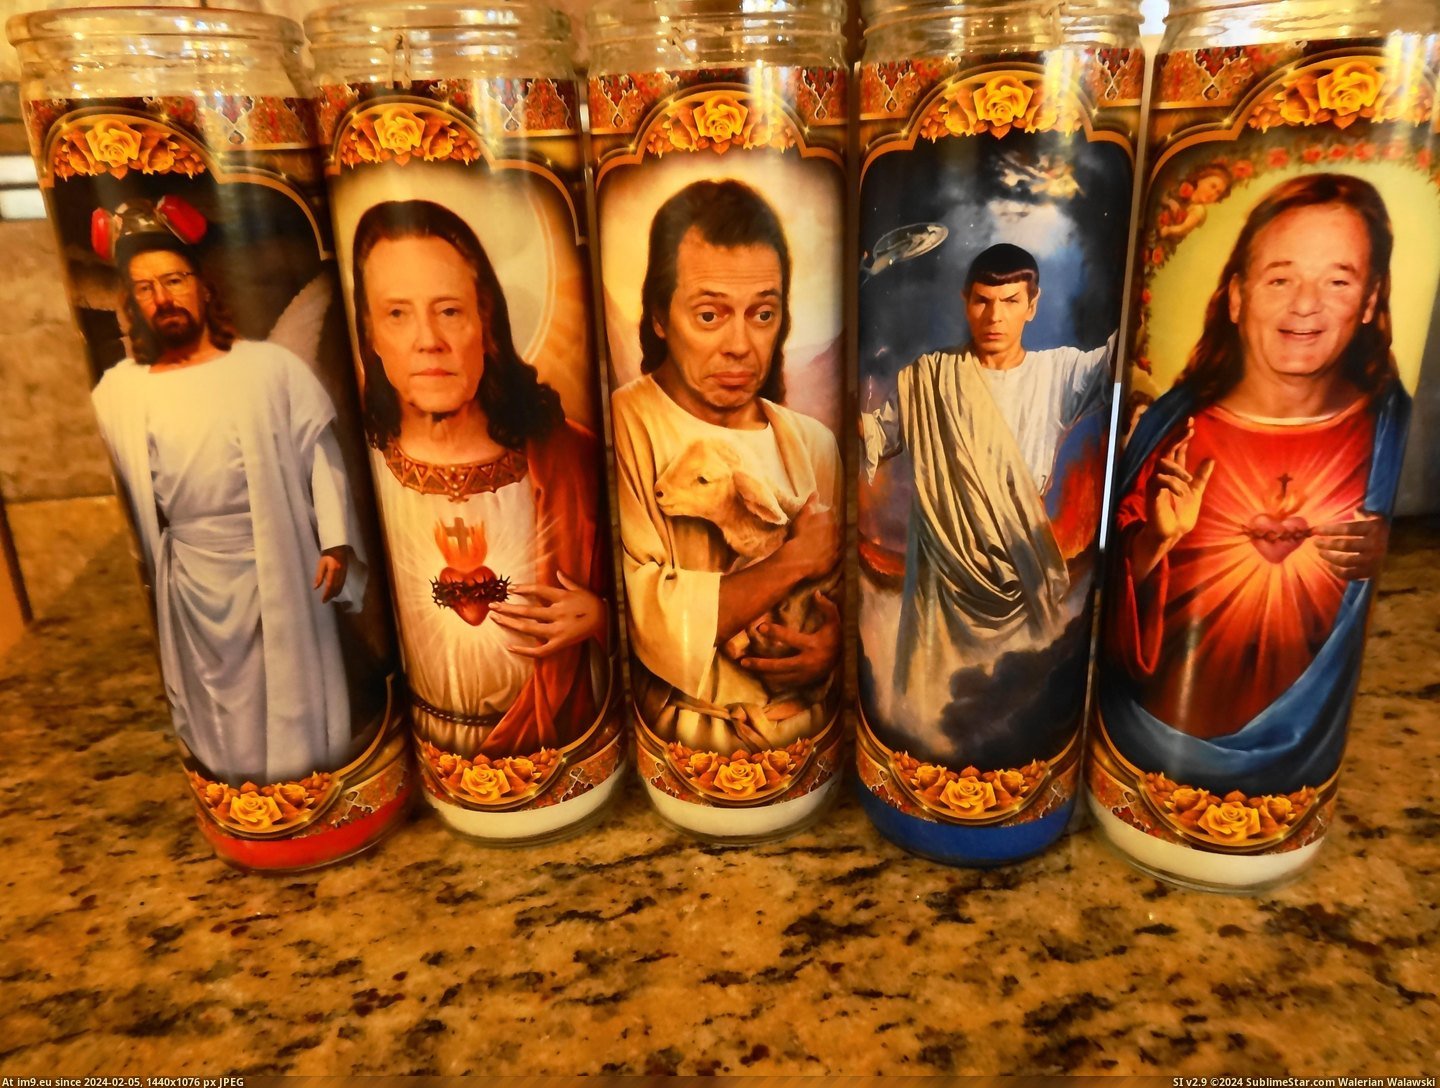 #Funny #Year #Dad #Outdid #Religous #Holidays #Odd #Candles [Funny] Every year my dad gets us odd religous candles around the holidays. This year he really outdid himself. Pic. (Image of album My r/FUNNY favs))